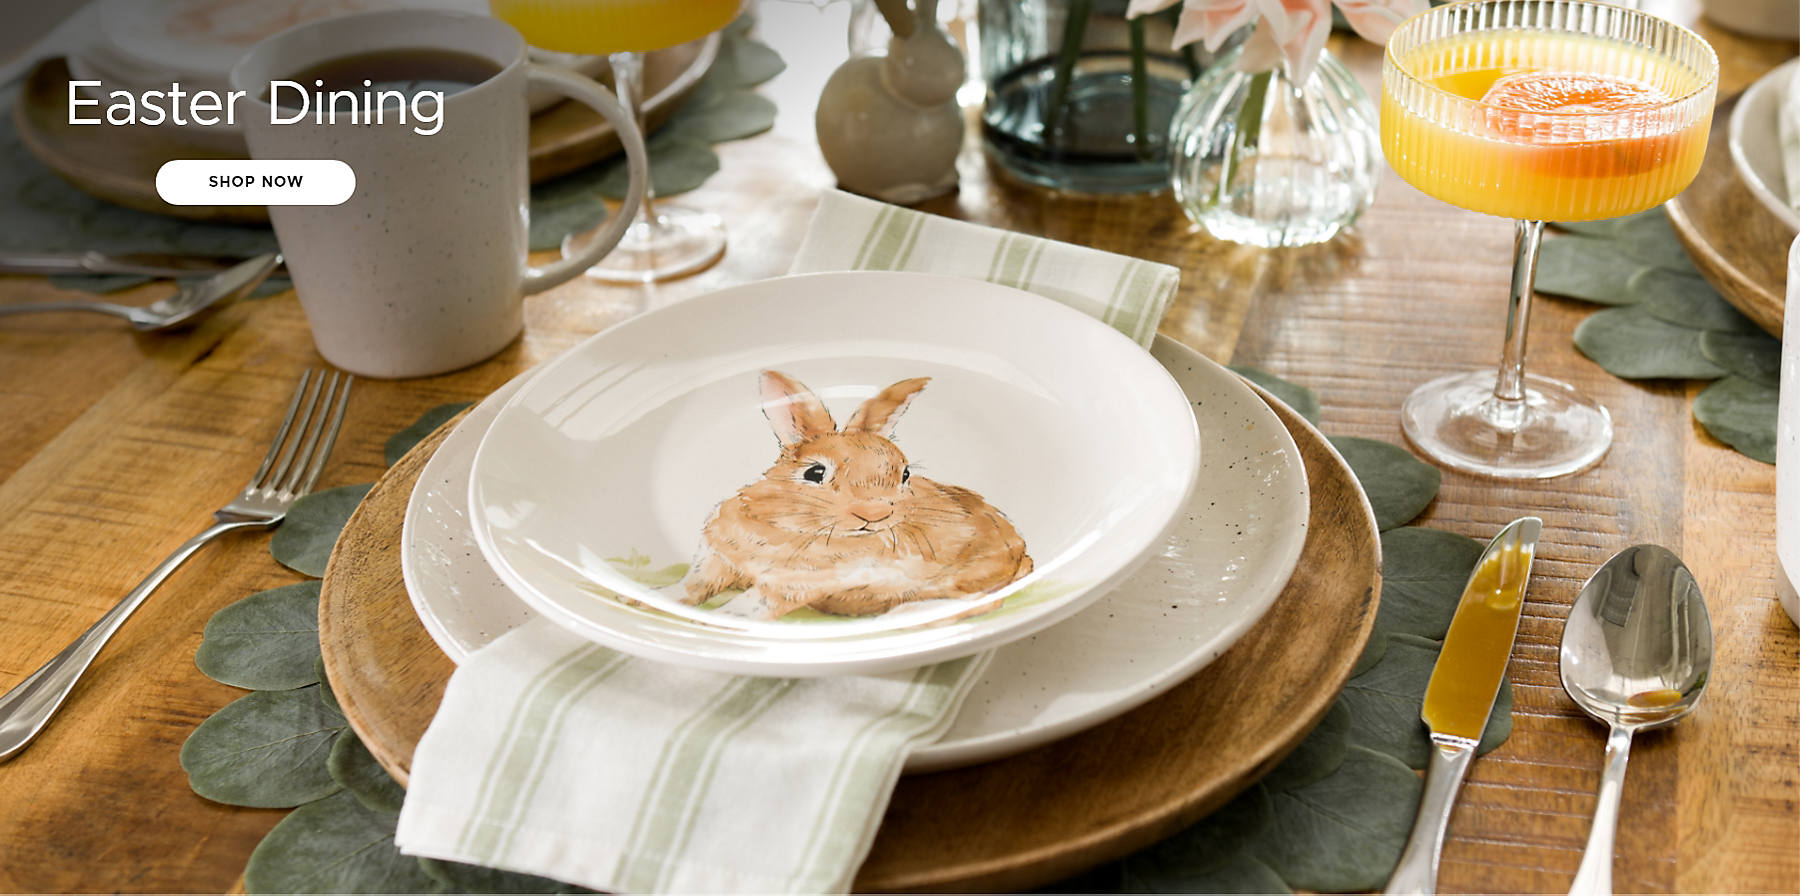 Easter Dining shop now